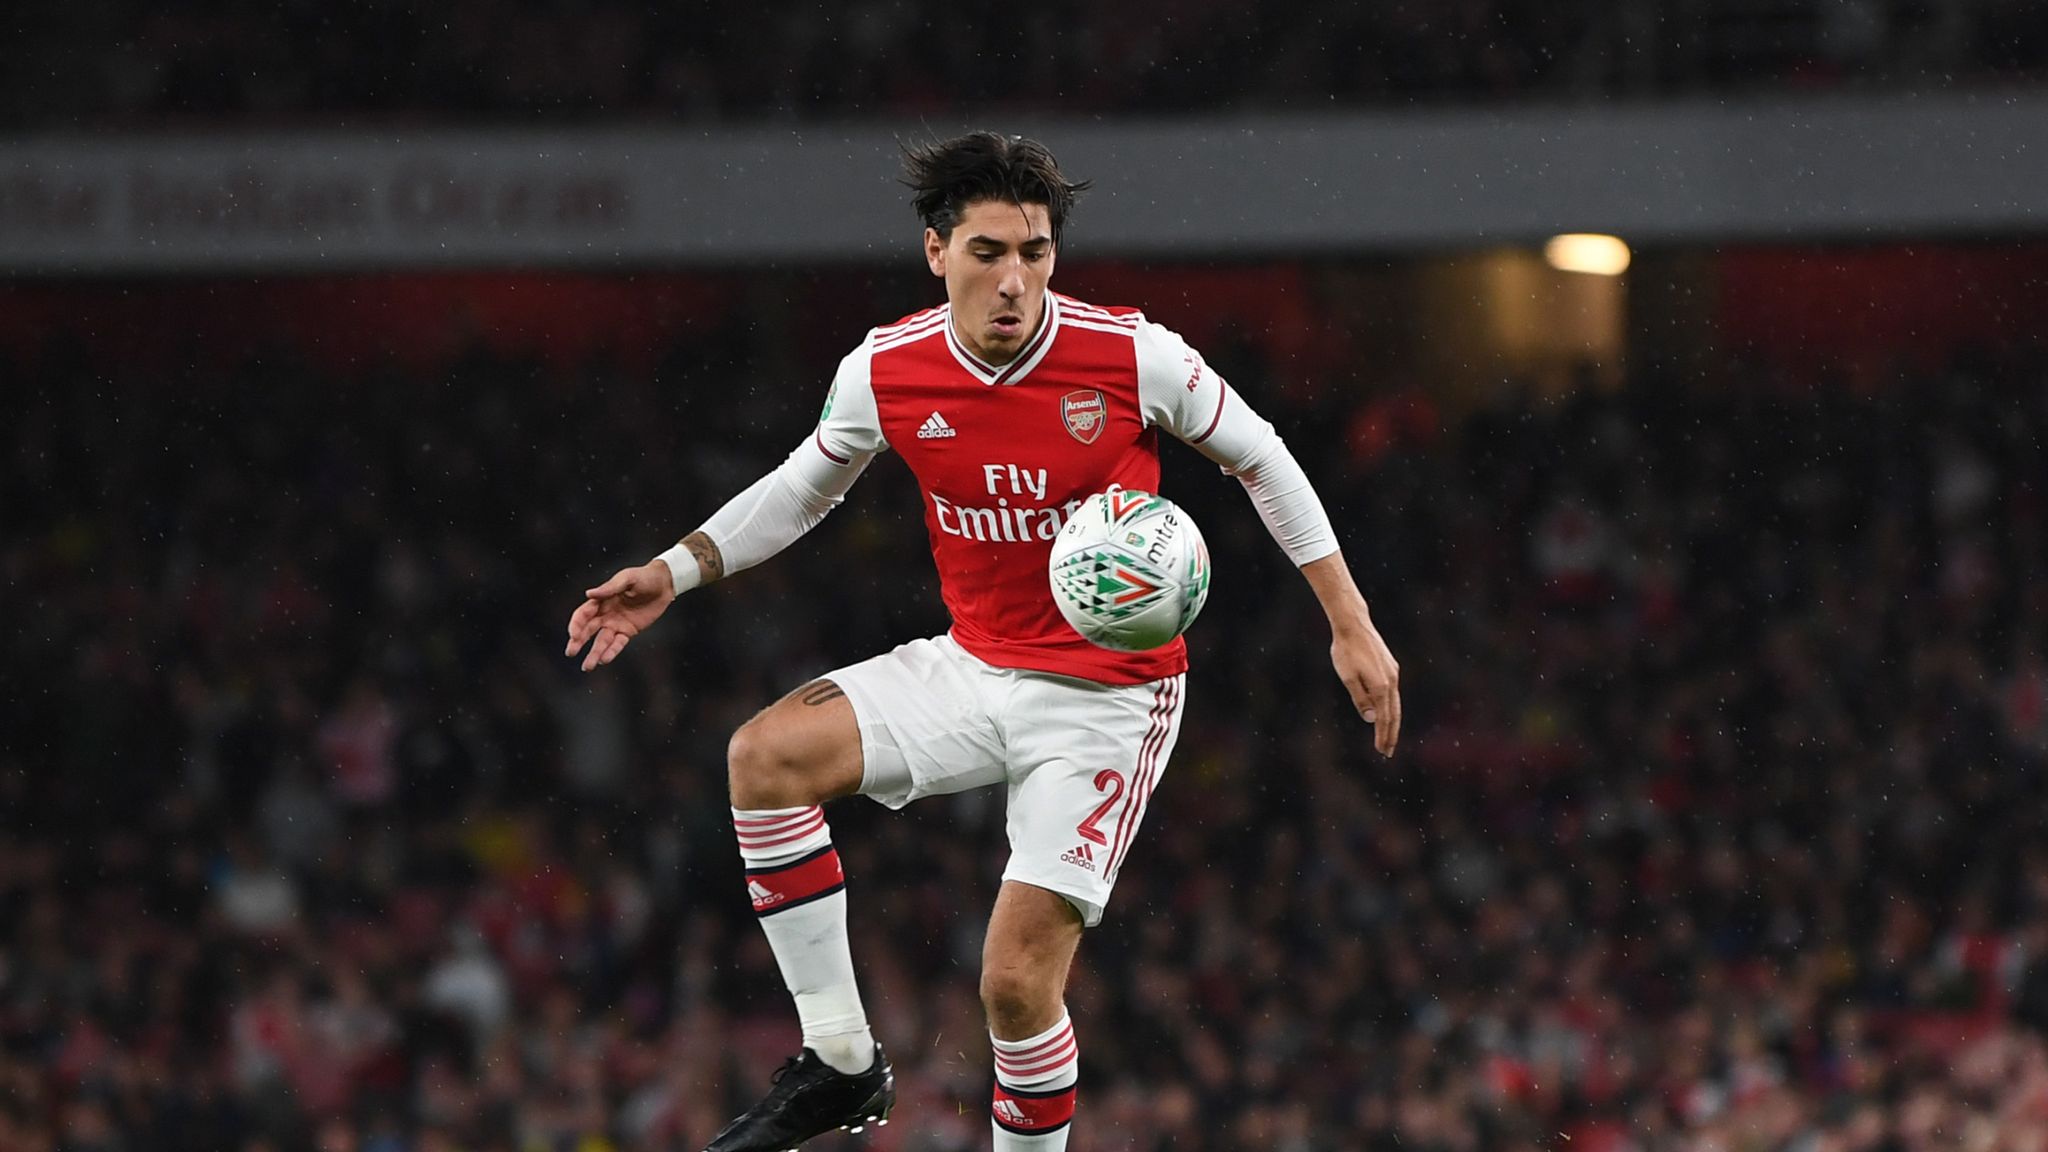 Hector Bellerin not ready for Man Utd vs Arsenal, according to Emery